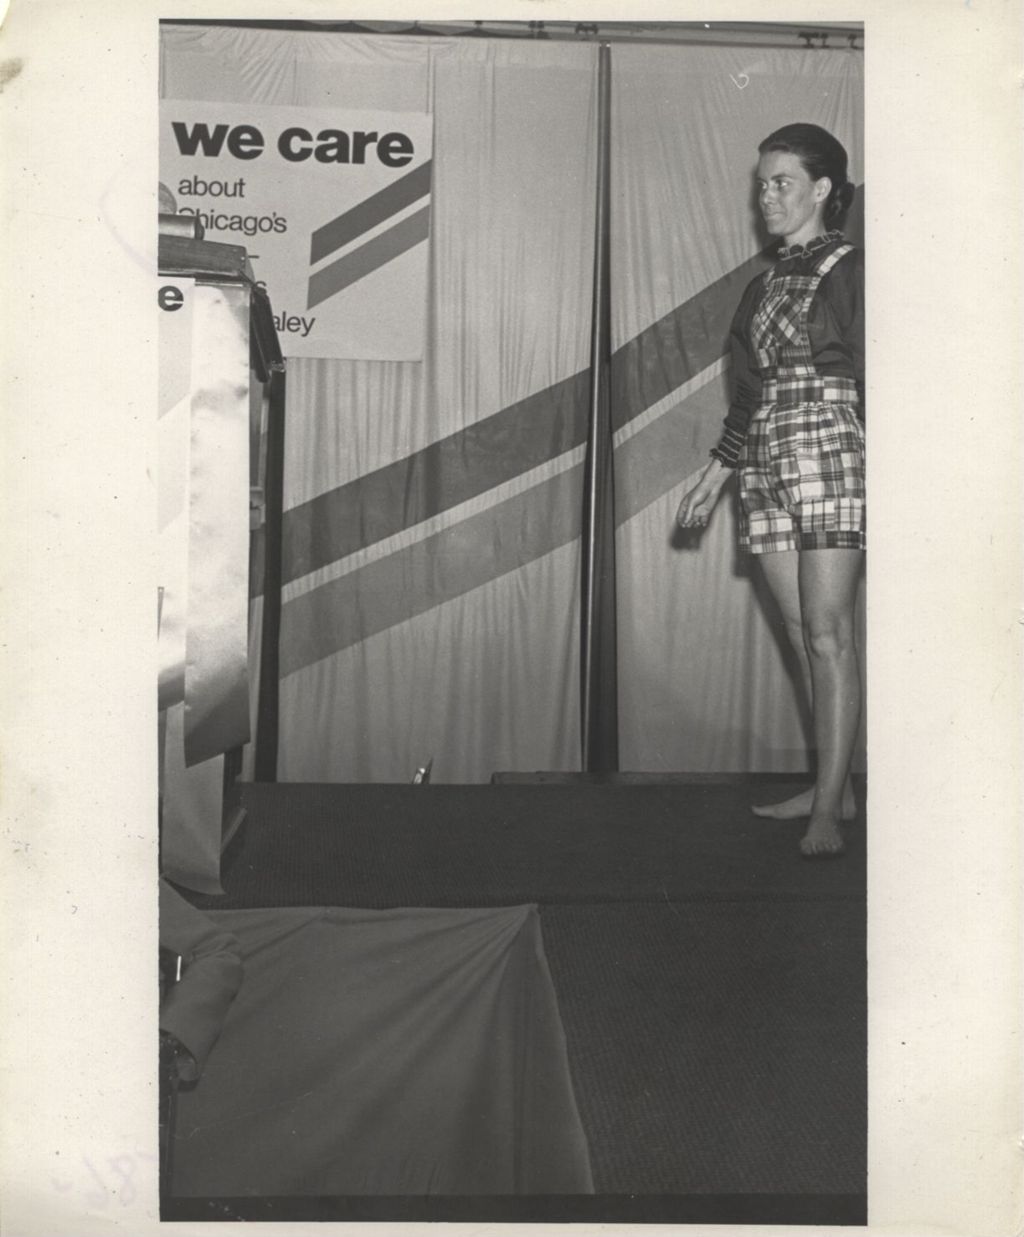 Woman modeling an outfit at a "We Care" event